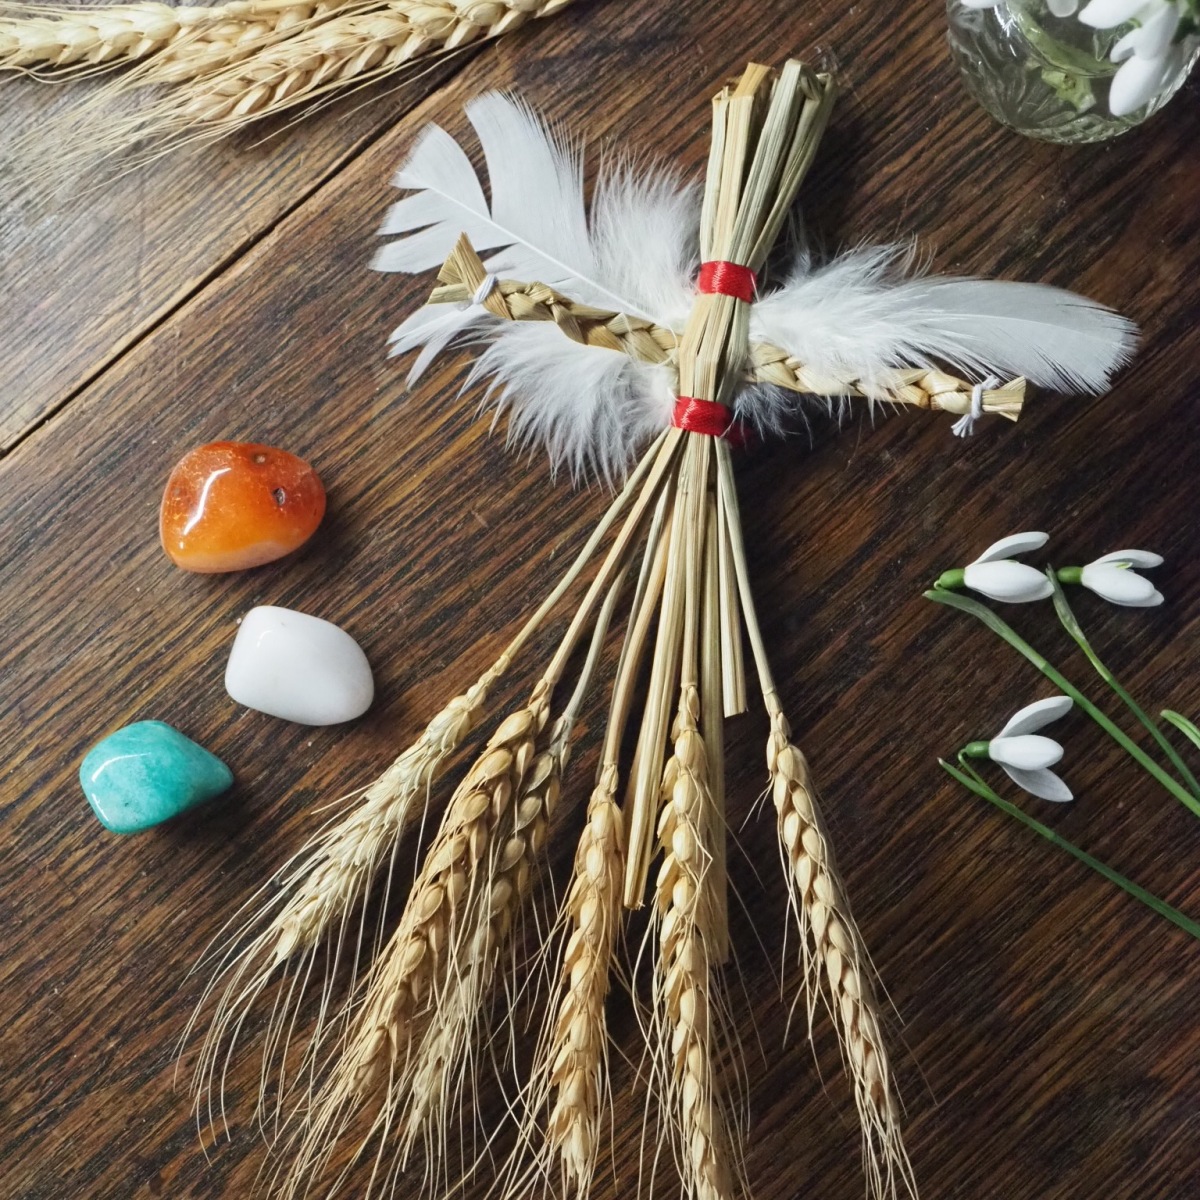 Simple Ways to Celebrate Imbolc; the First Stirrings of Spring